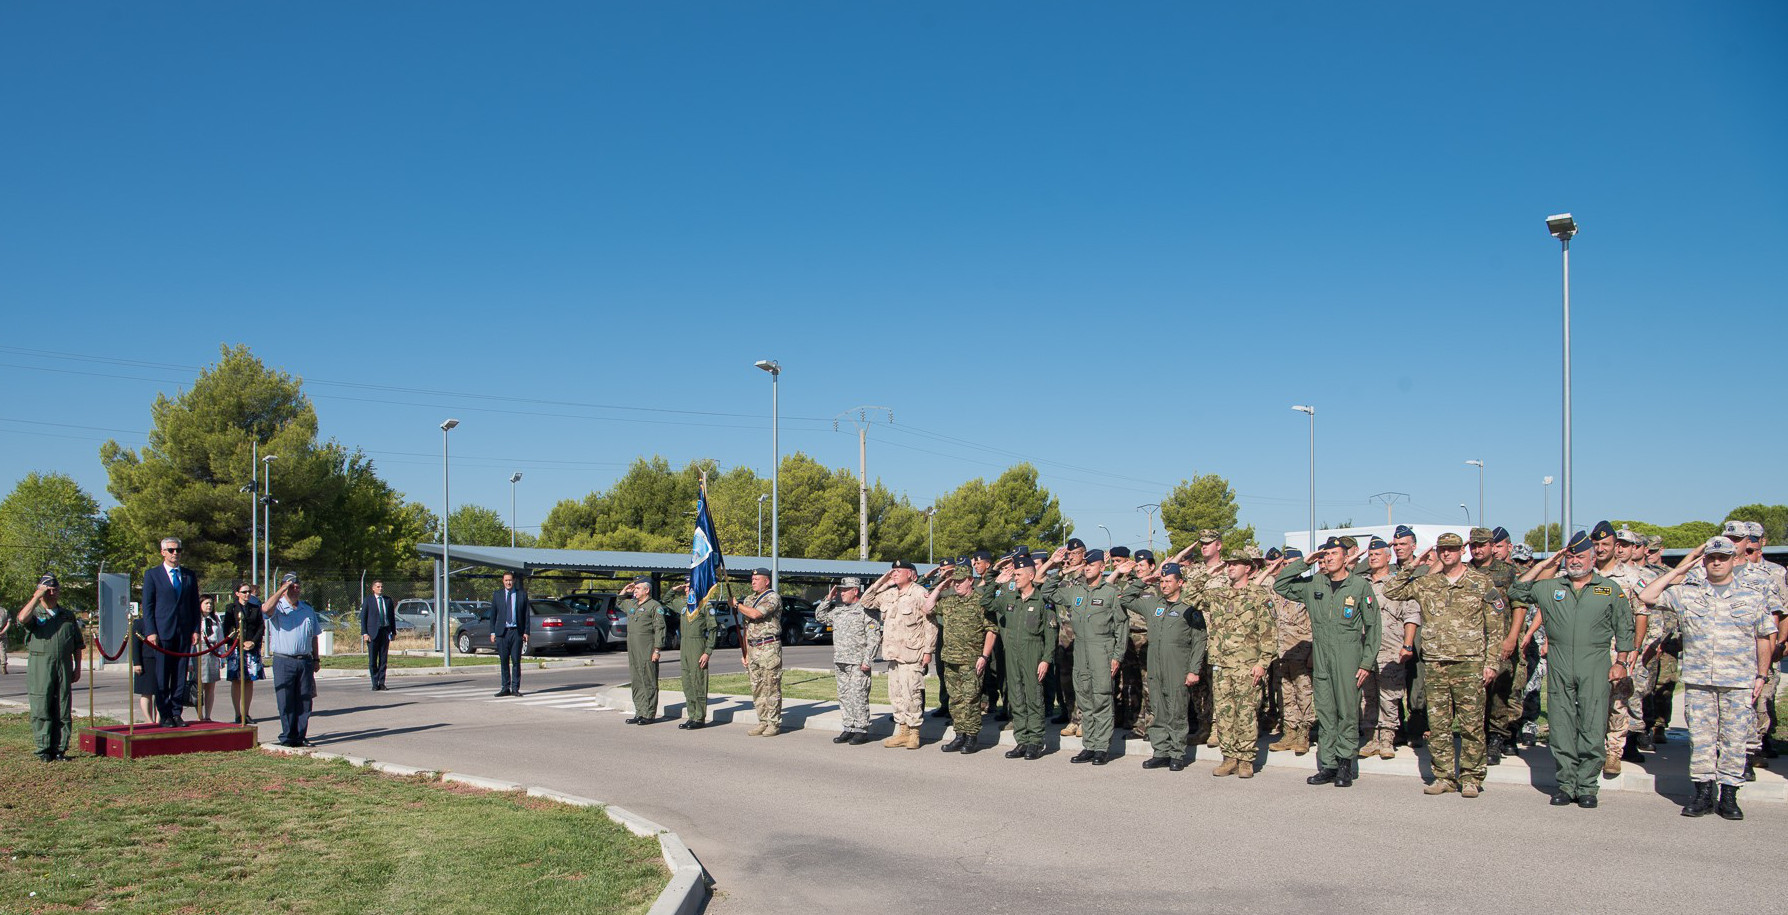 The Latvian Minister of Defence visits the Combined Air Operations Centre in Torrejón